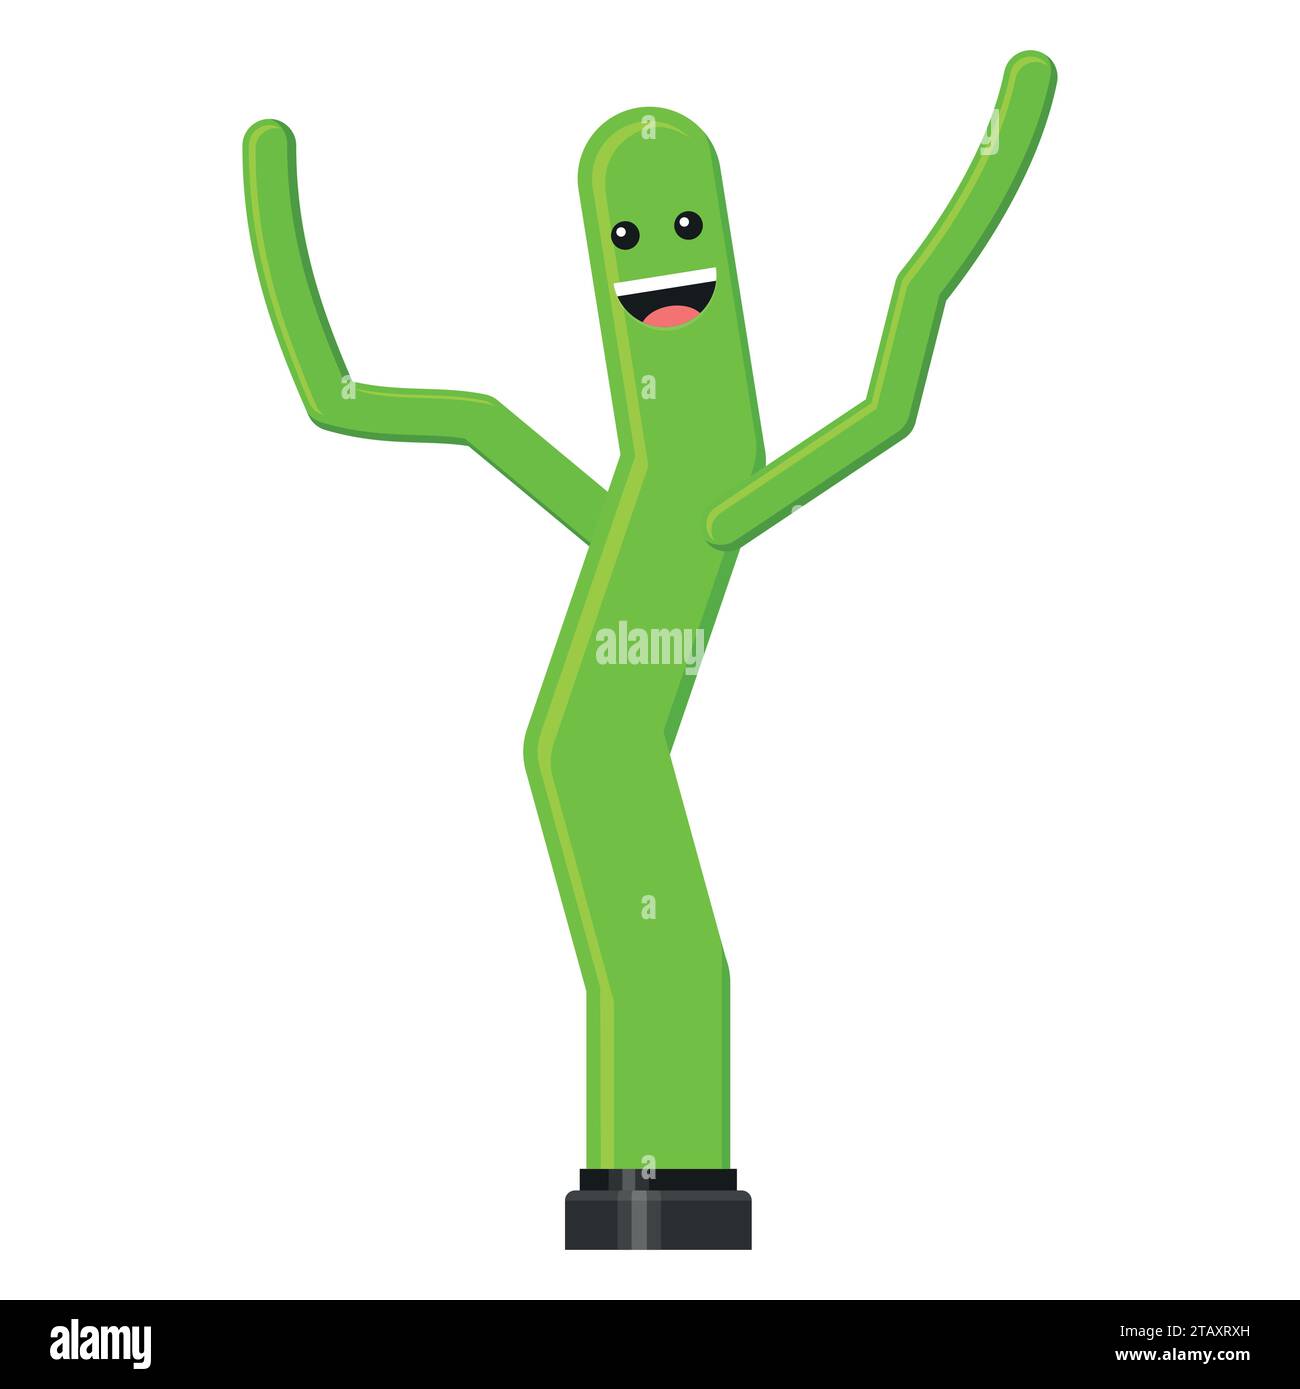 Dancing inflatable green tube man in flat style isolated on white background. Wacky waving air hand for sales and advertising. Vector illustration Stock Vector